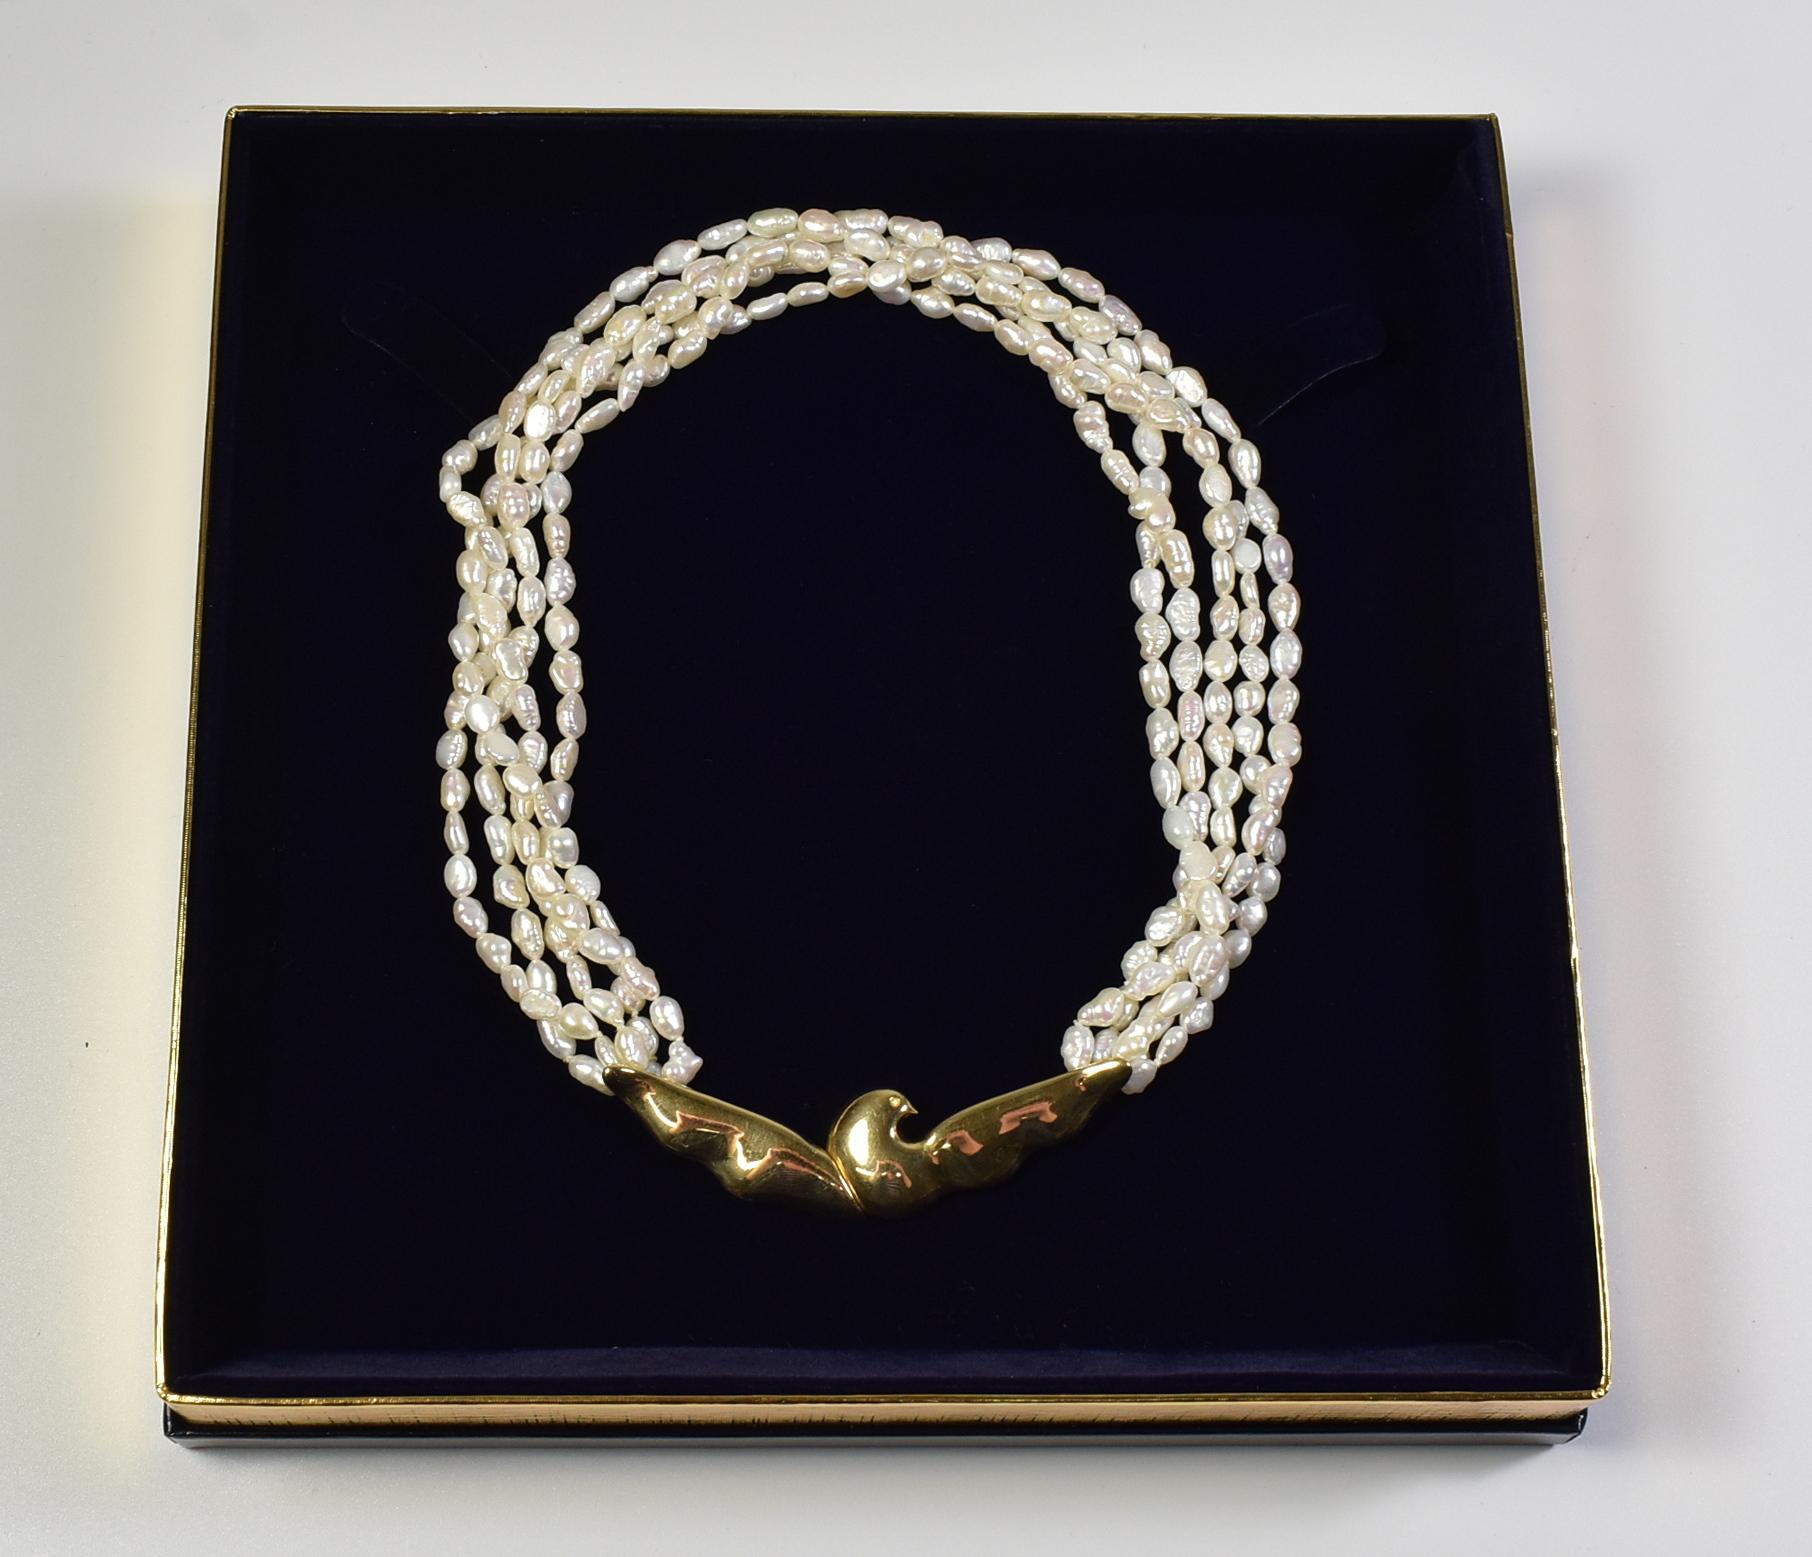 Tiffany & Co 18K multi-strand freshwater pearl necklace by Paloma Picasso. Dove motif clasp, 5 strands of pearls, 16